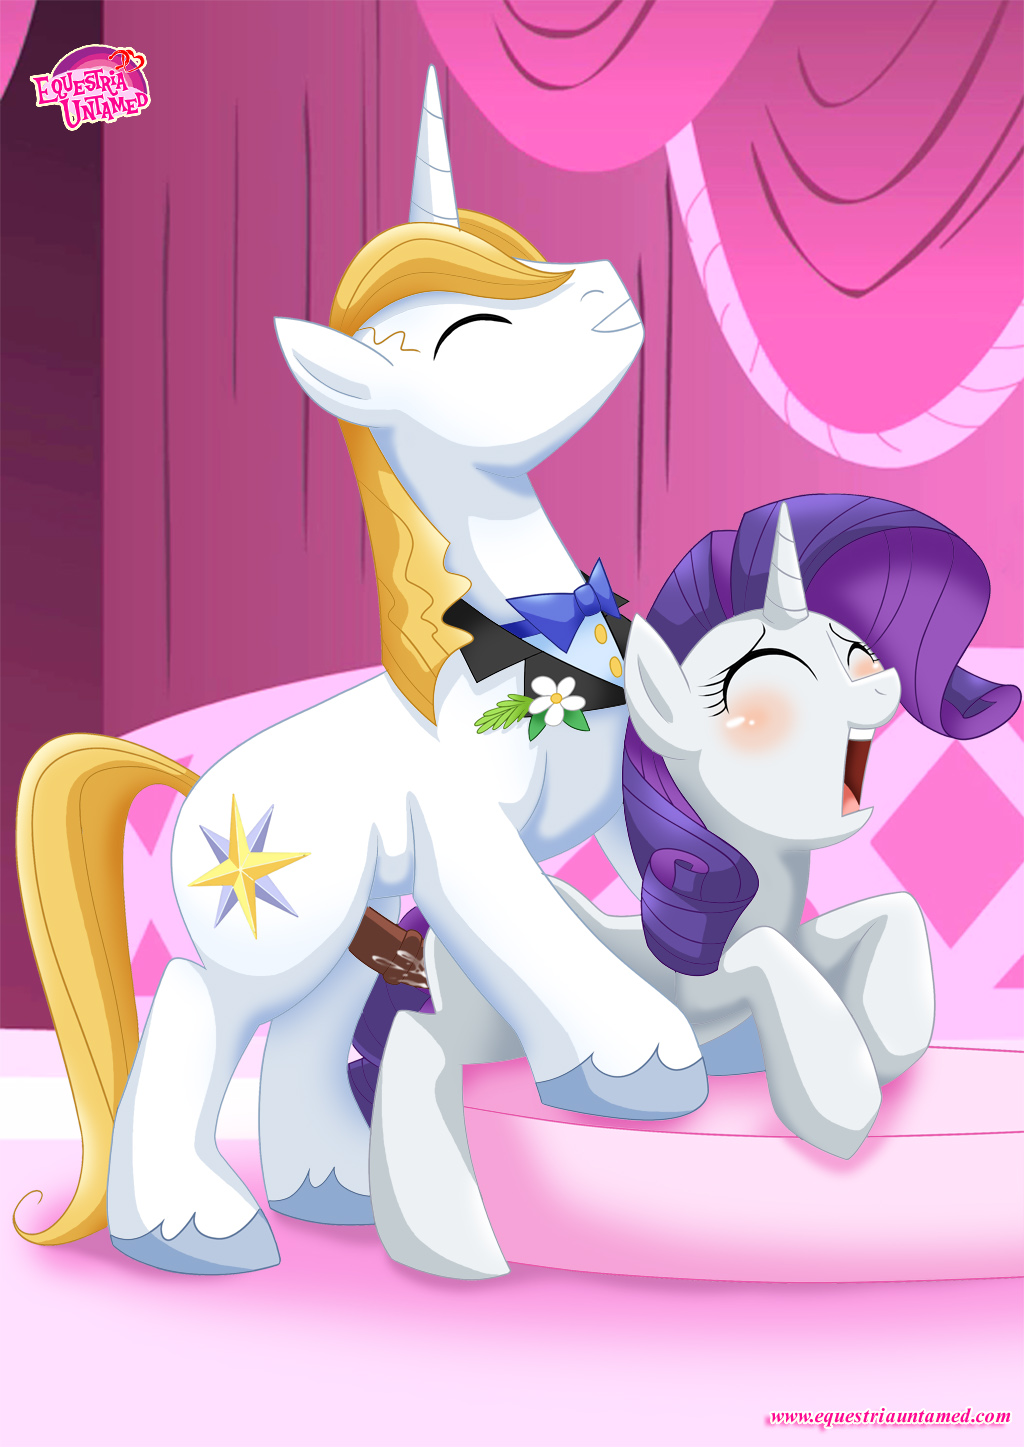 bbmbbf equestria_untamed friendship_is_magic hasbro my_little_pony palcomix...